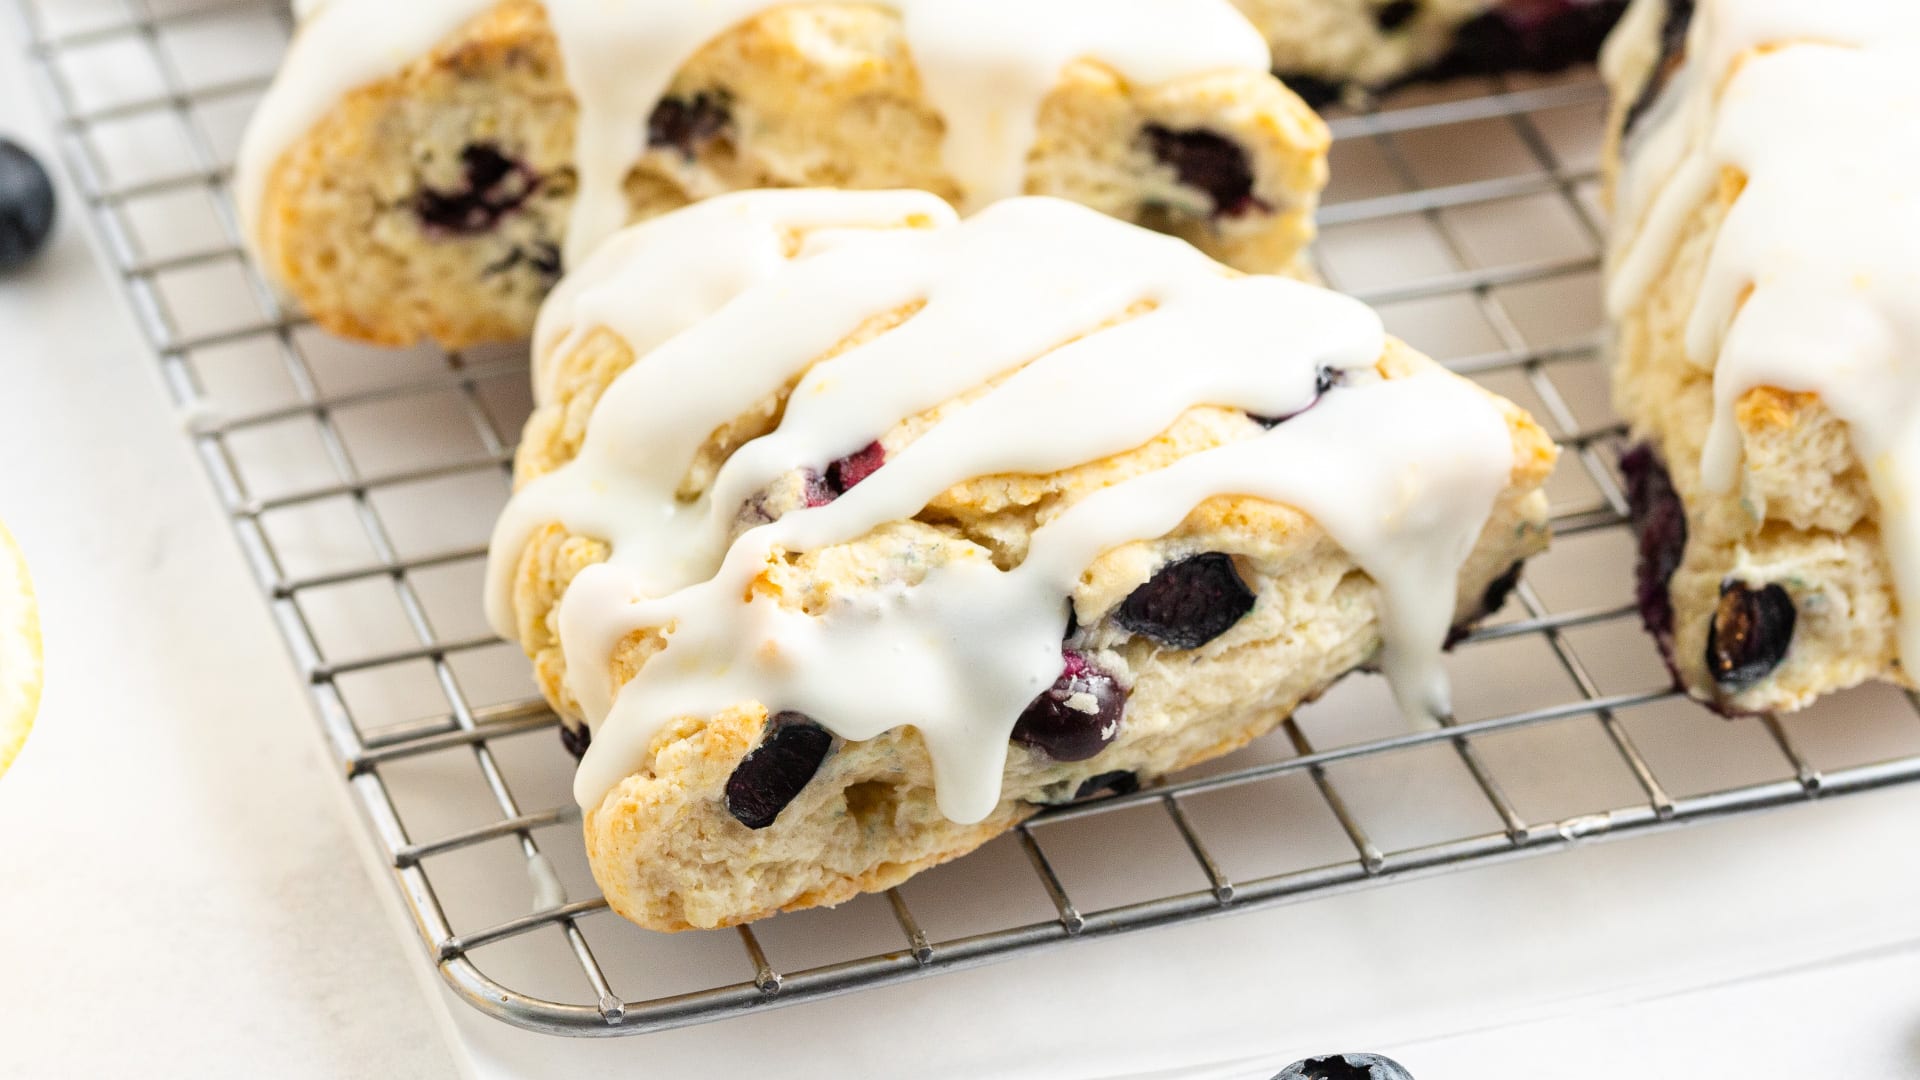 Blueberry and Lemon Scones – Riegl Palate